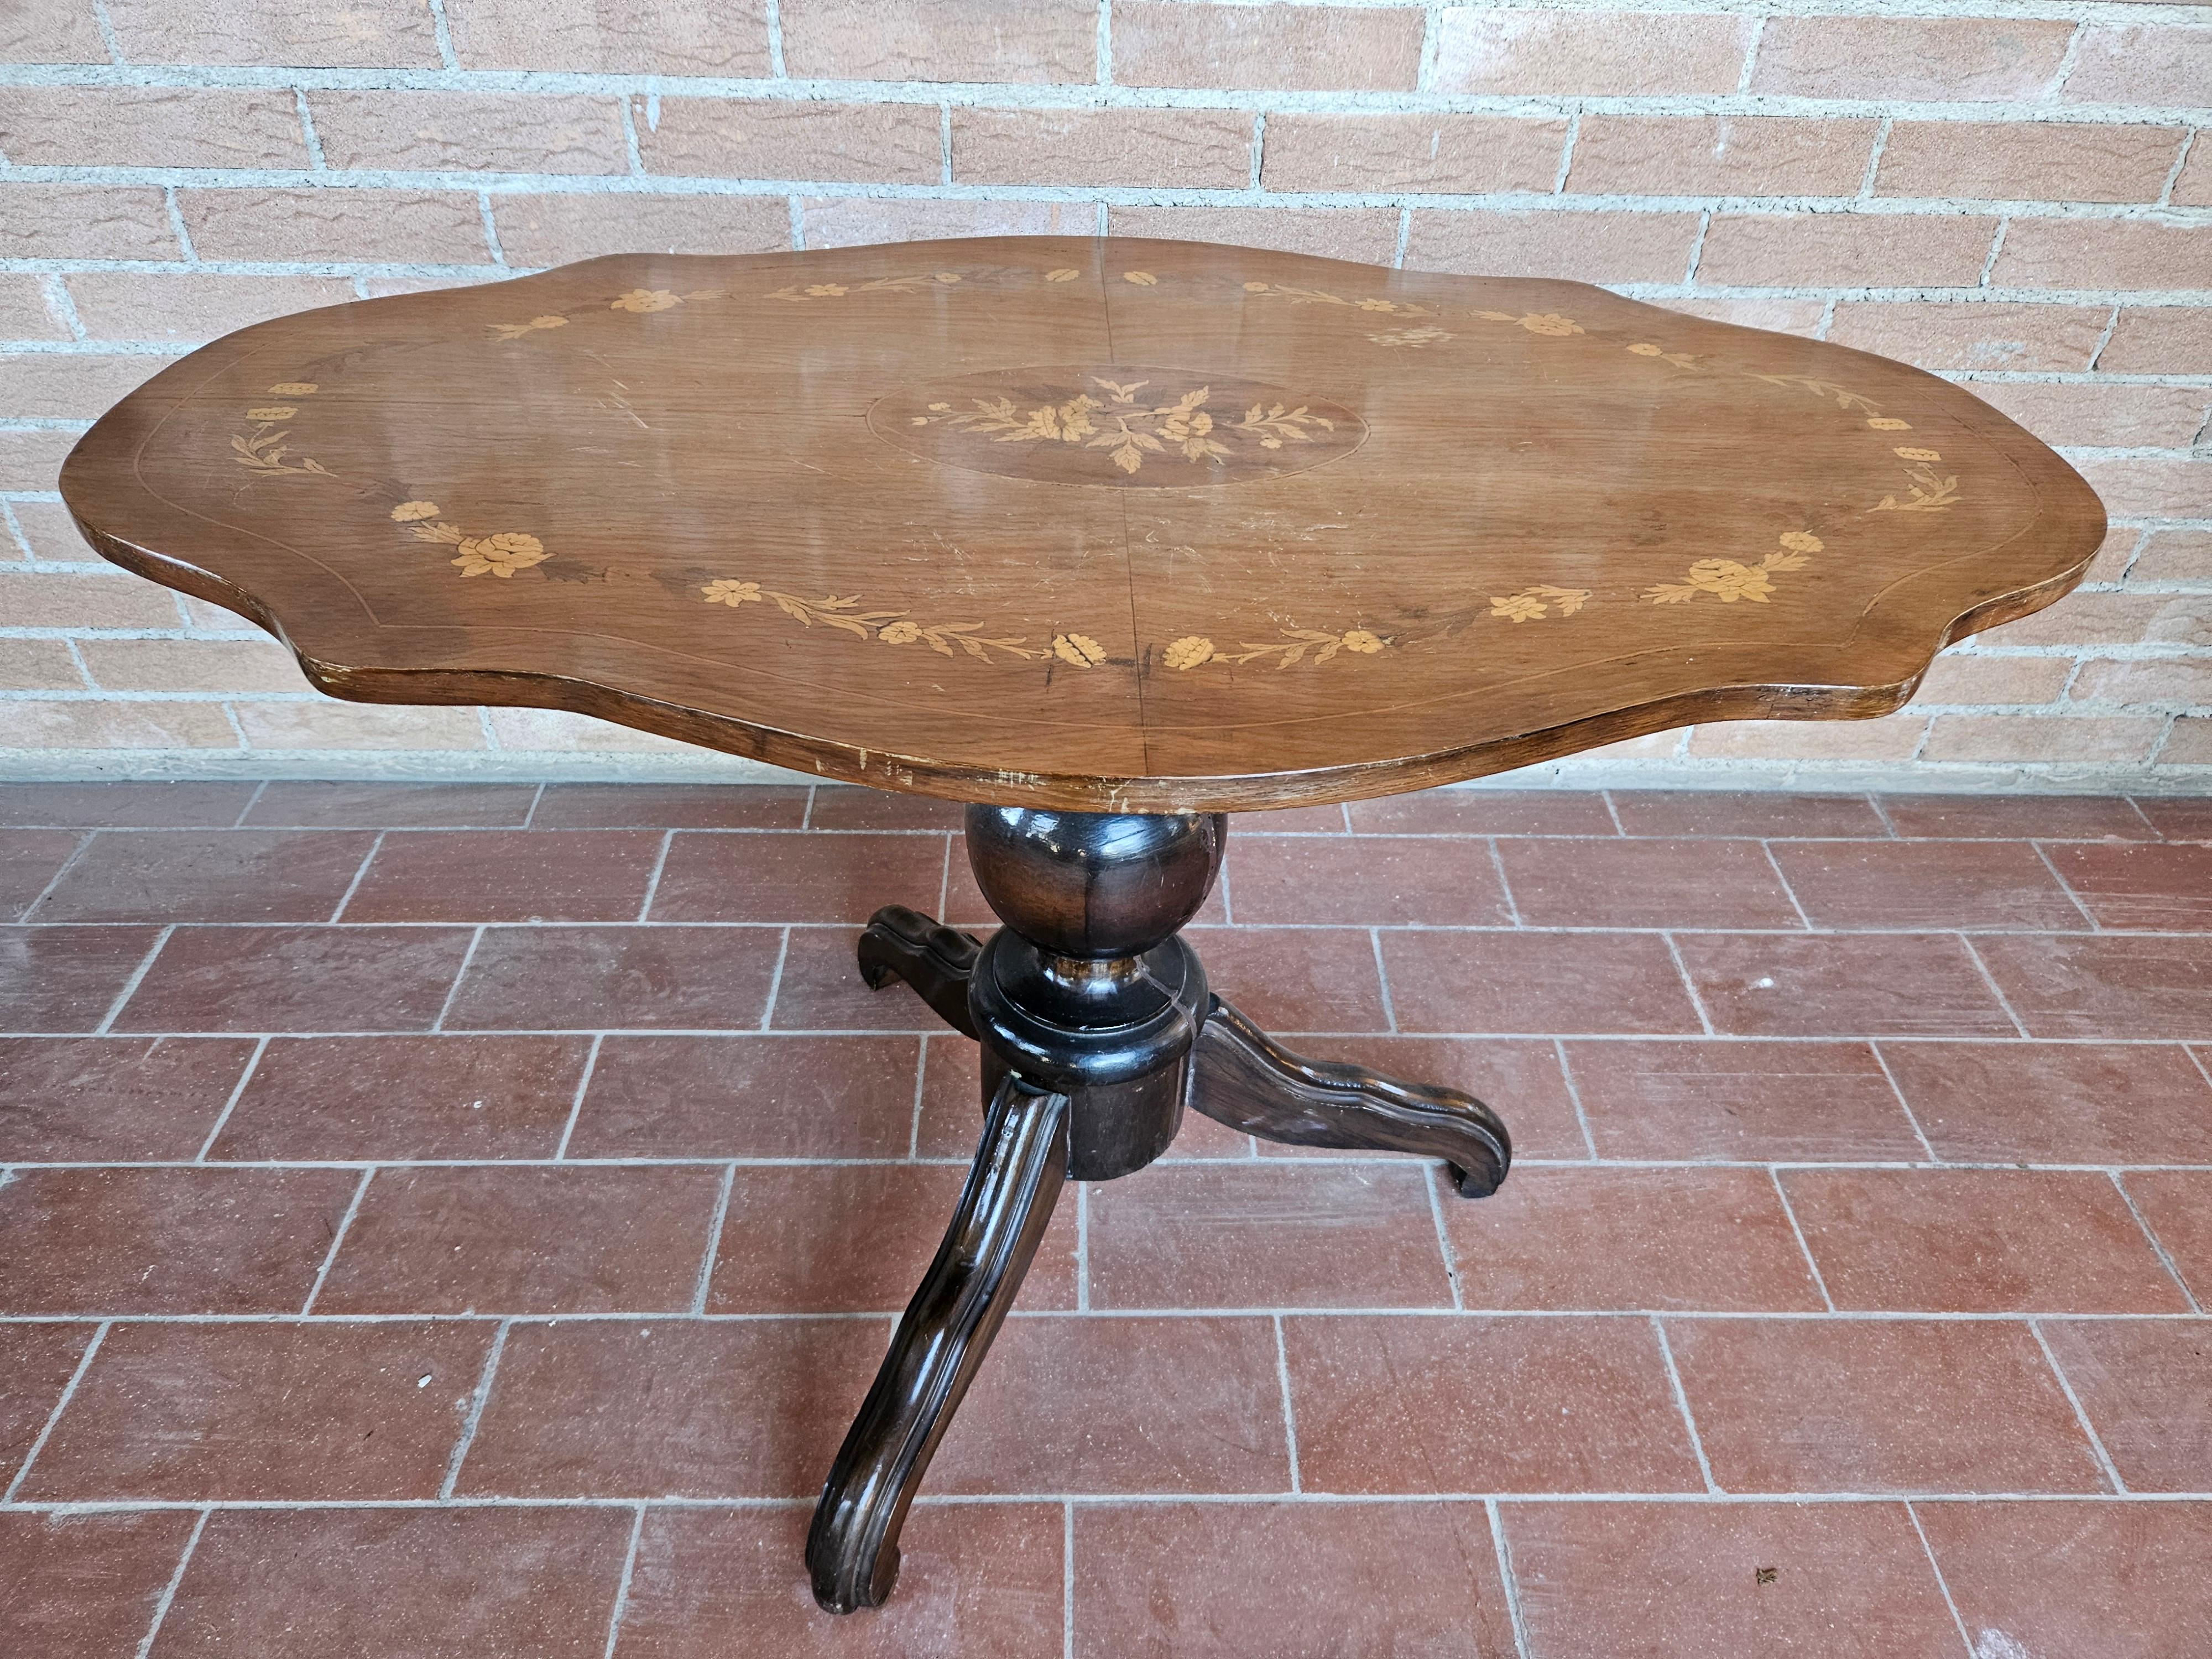 Italian-made cookie table circa 1940s in blond walnut with maple, rose maple, and mahogany inlays.
Worked and decorated top.

Perfect for a large living room or in between a couple of sofas.

Normal signs of wear due to age and use.
